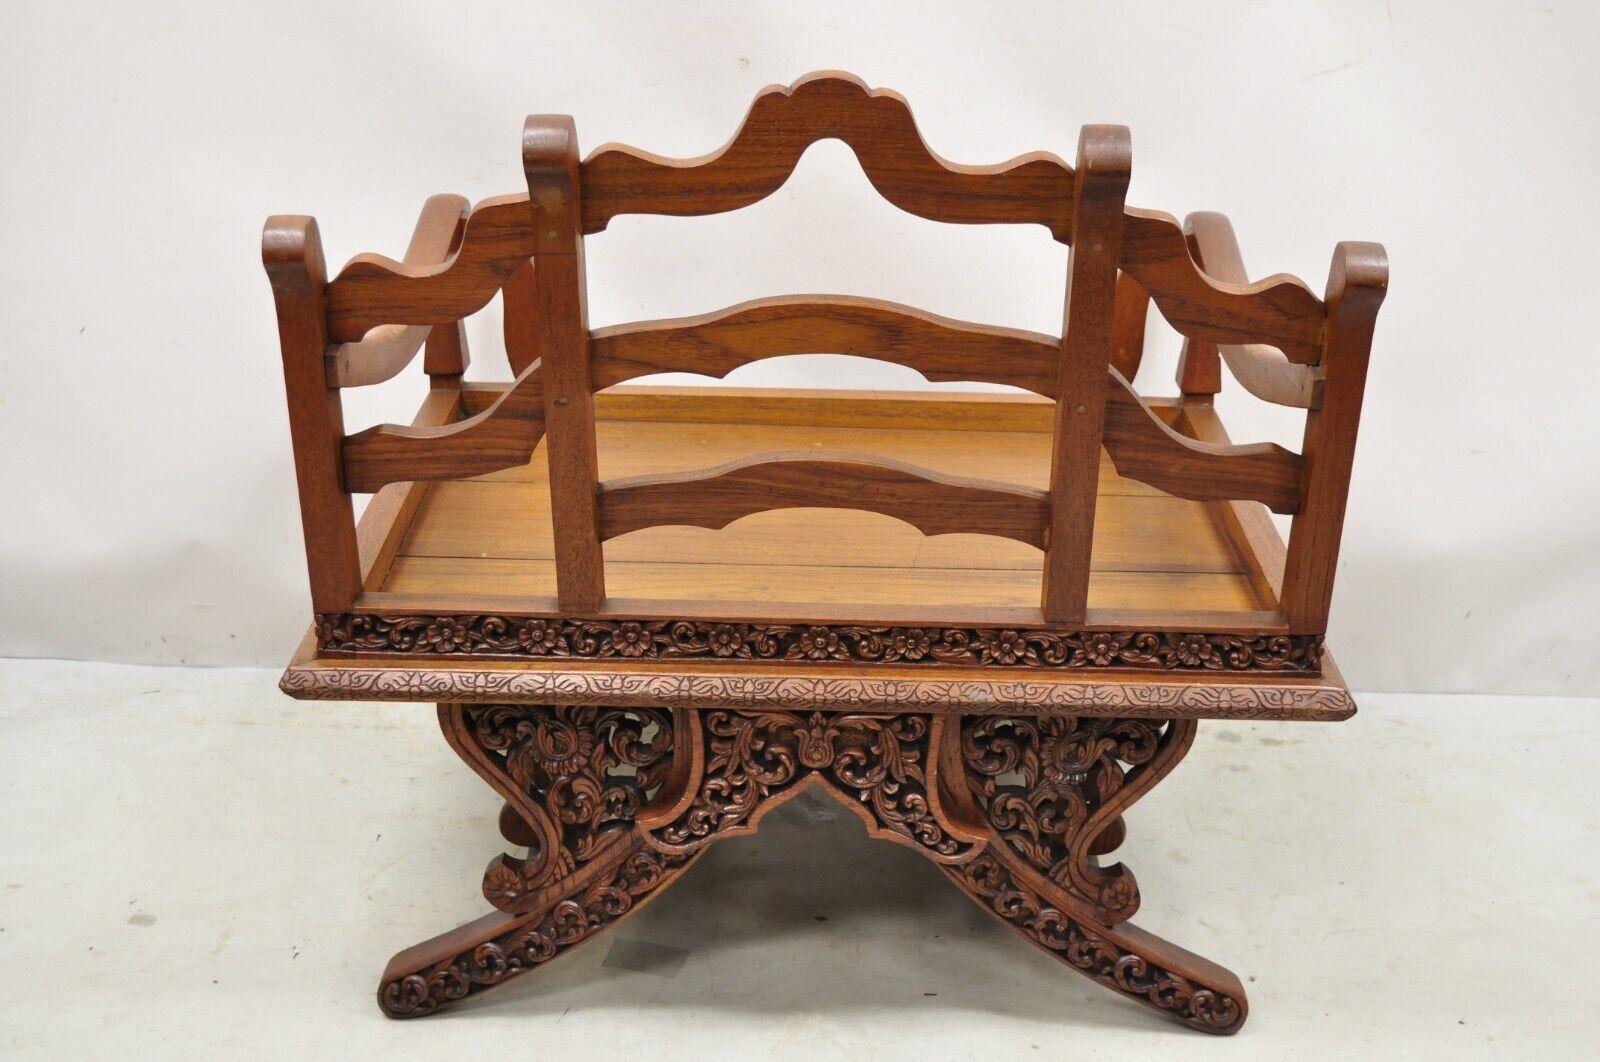 Vintage Chinoiserie Carved Teak Wood Howdah Elephant Saddle Accent Chair For Sale 3